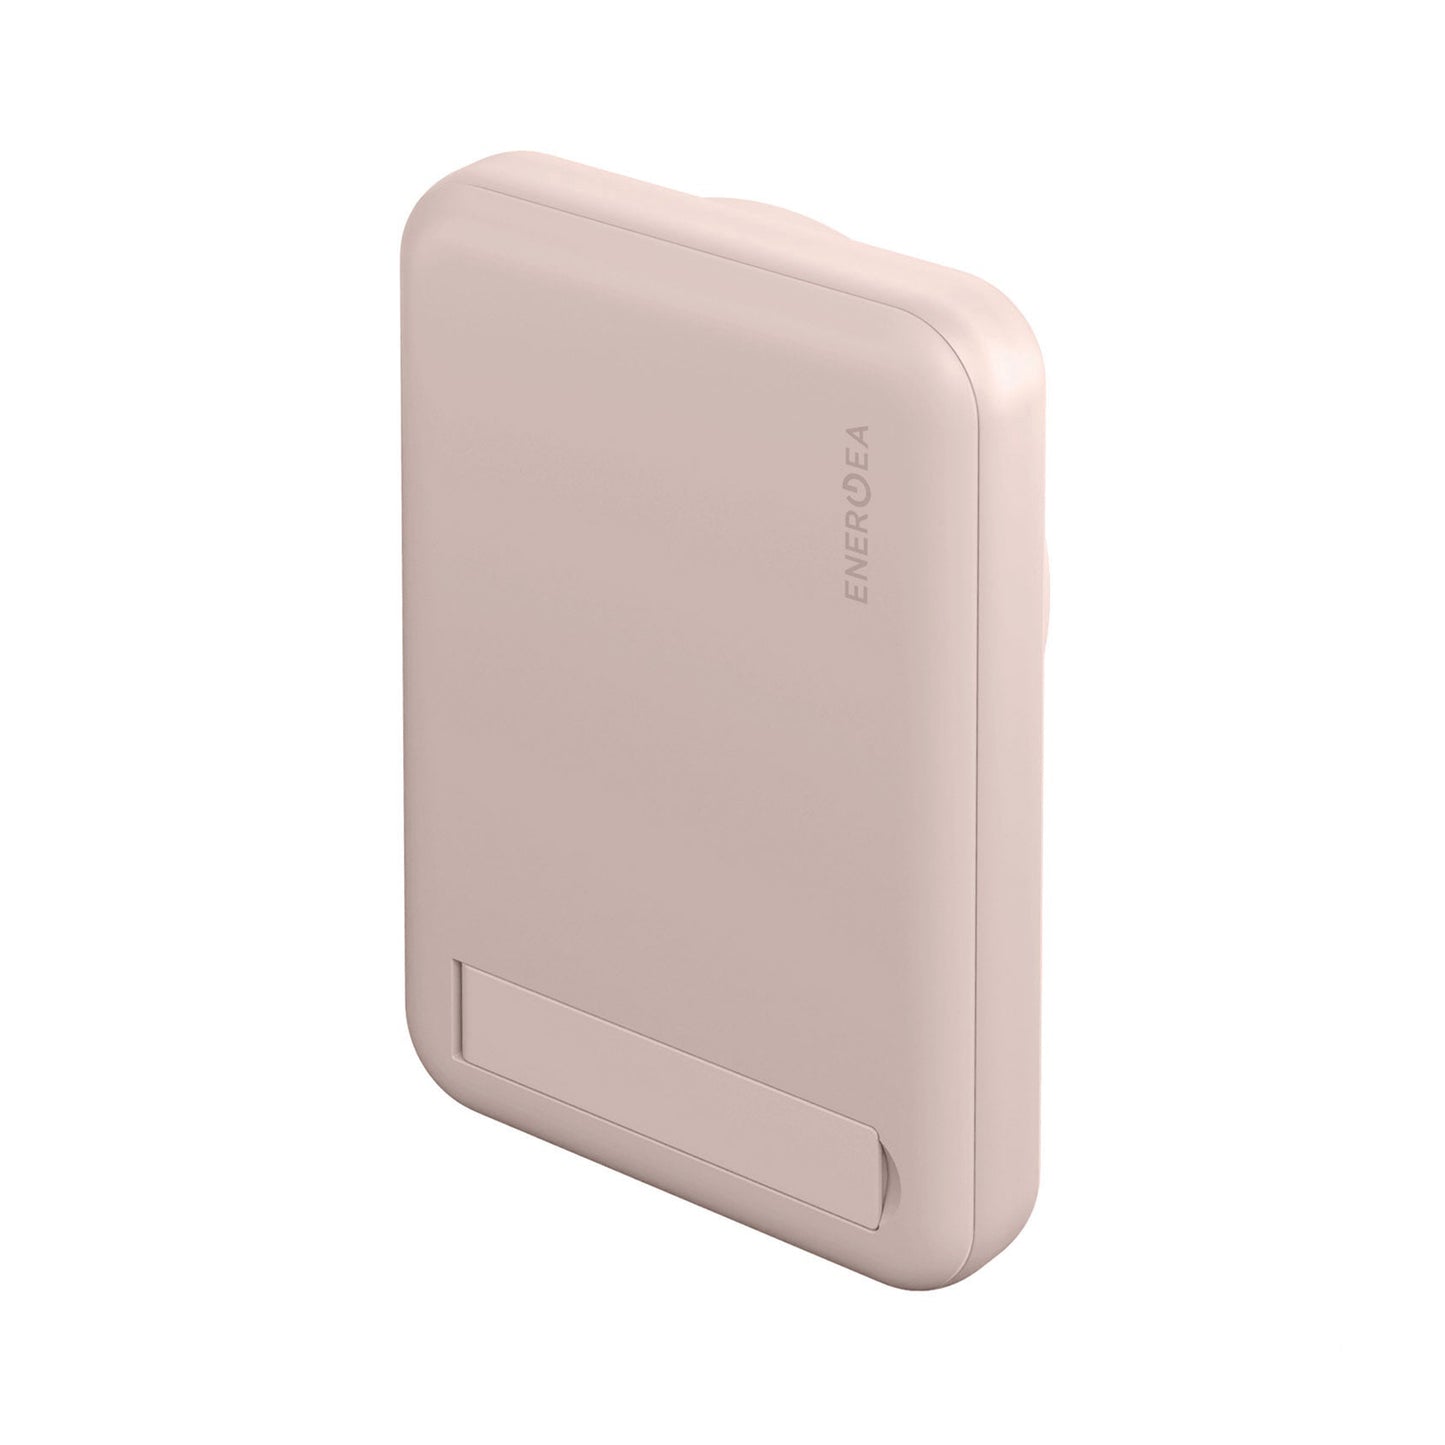 "ENERGEA MagPac Mini 10,000 mAh Wireless Power Bank with Stand - Pink"